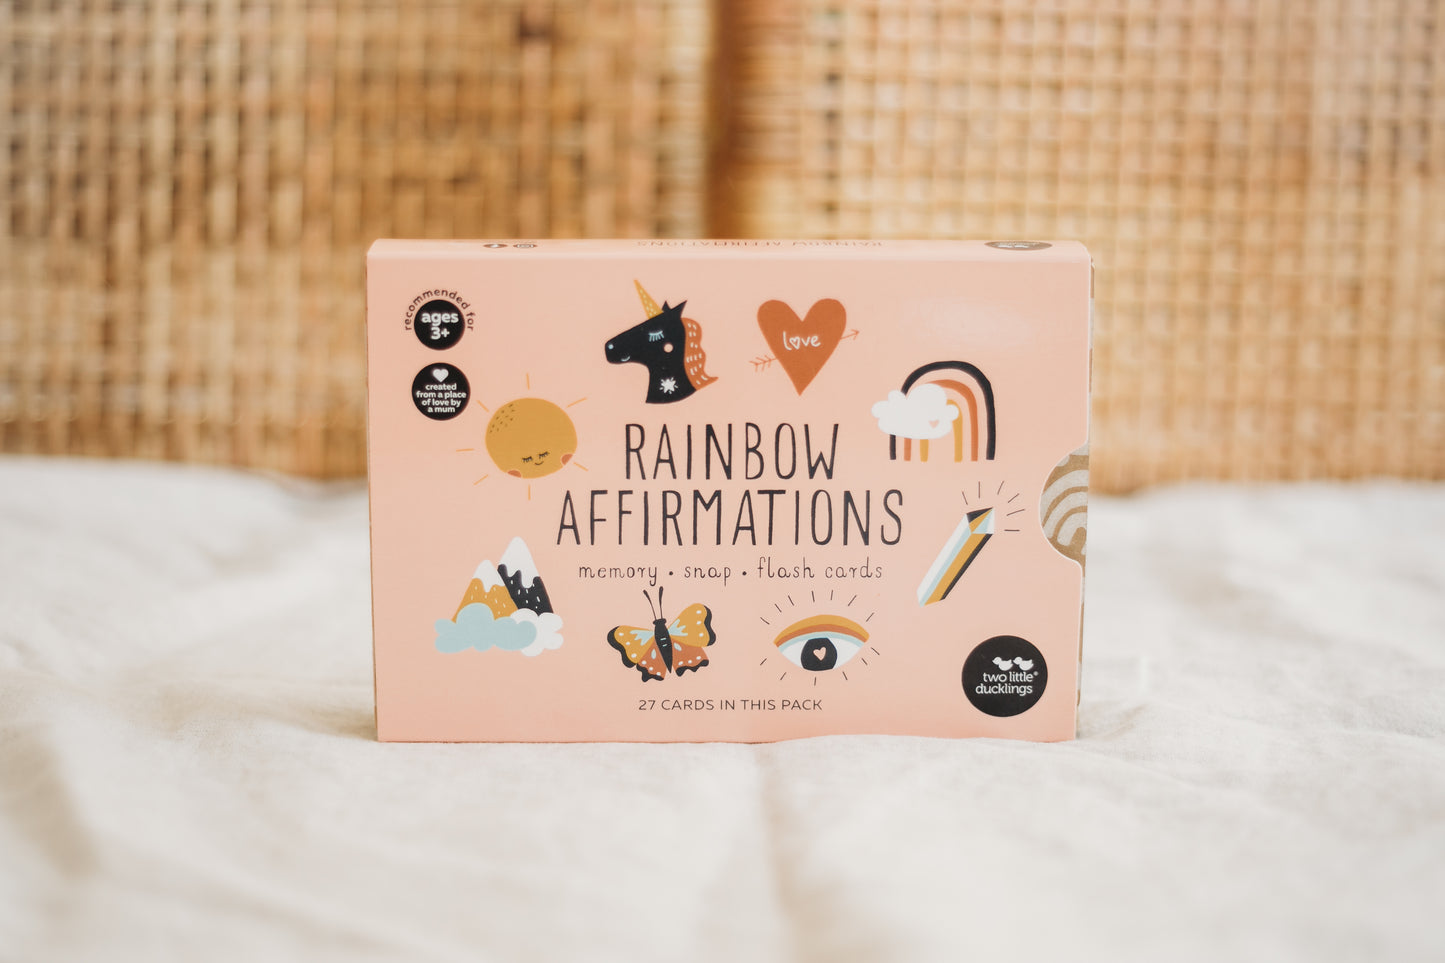 Rainbow Affirmations - Snap & Memory Game